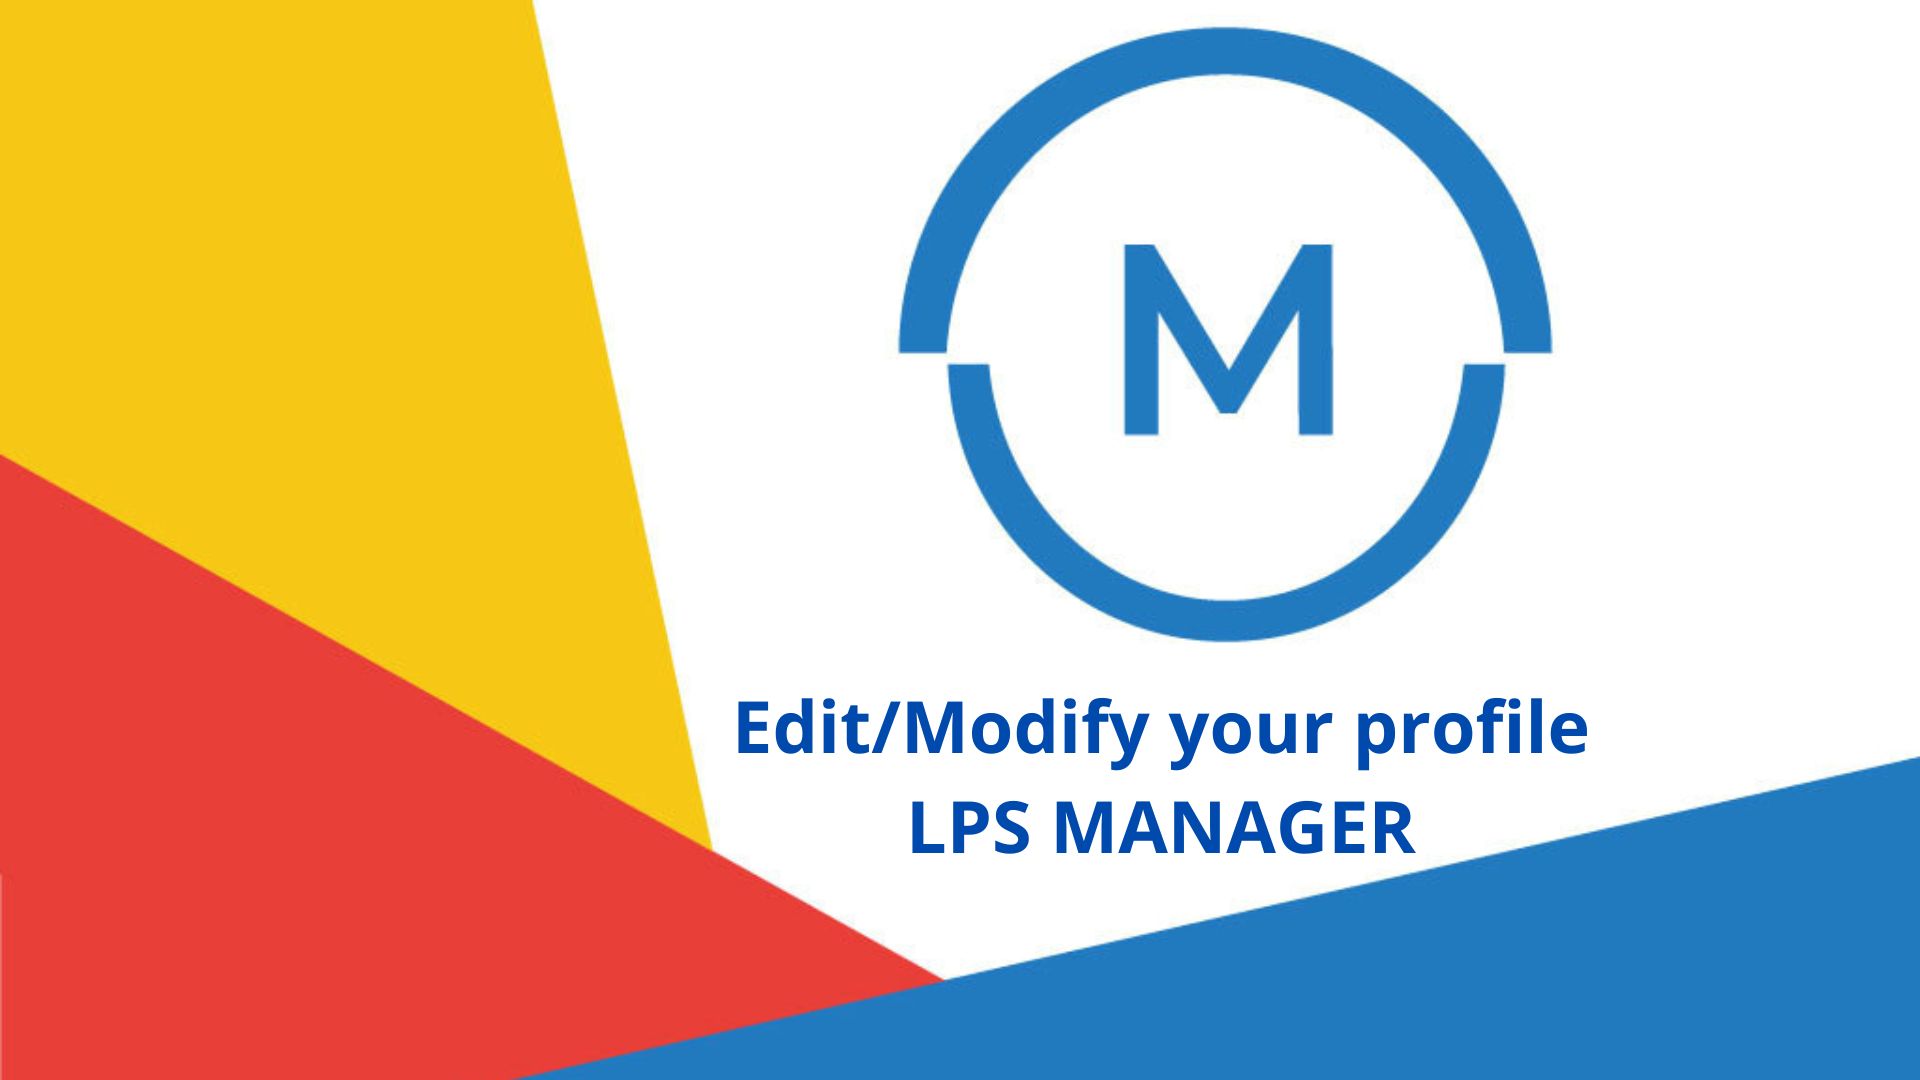 LPS Manager, edit, modify your profile